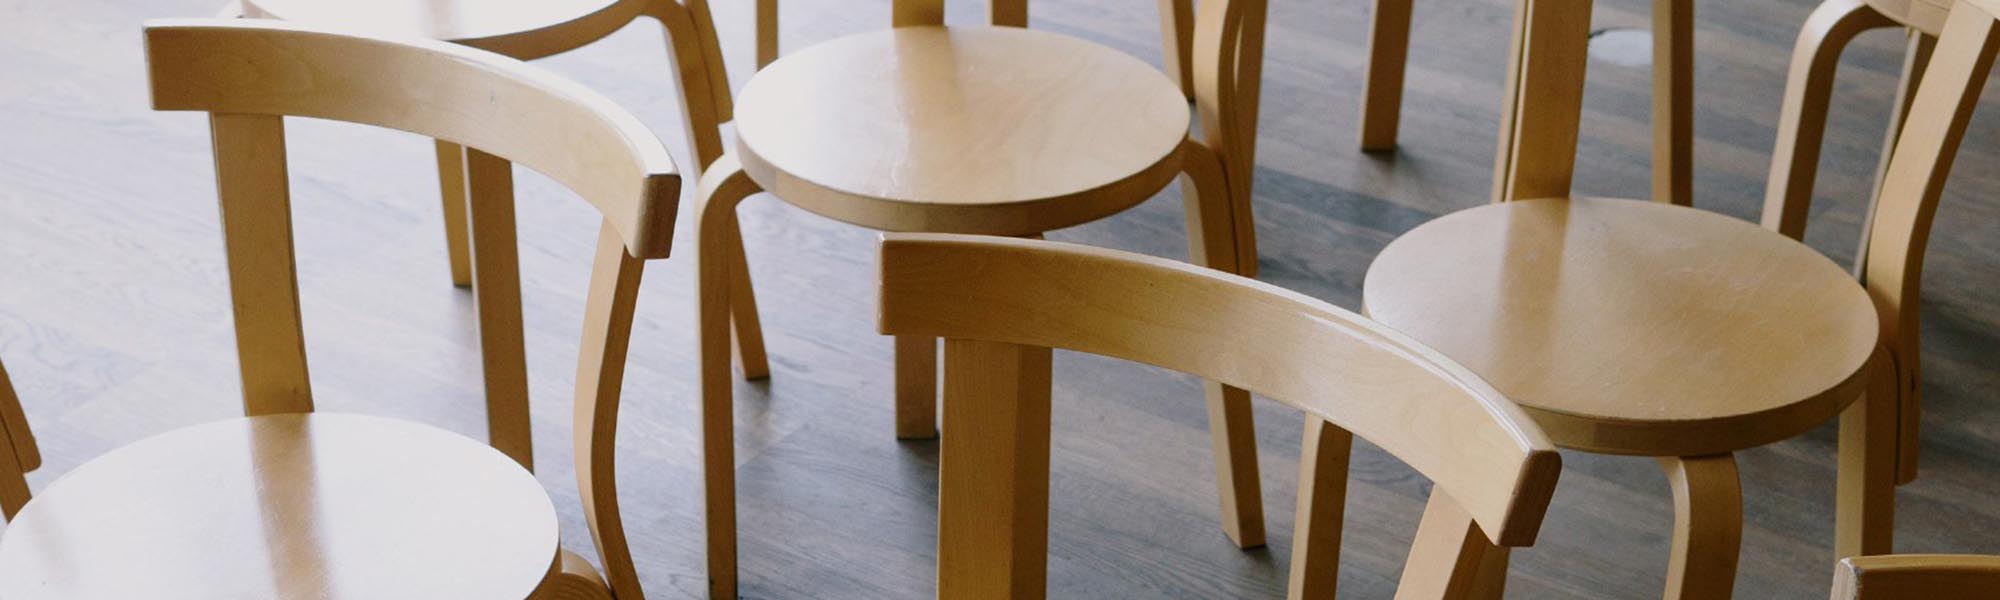 Wooden stools in a minimalist style in the living room